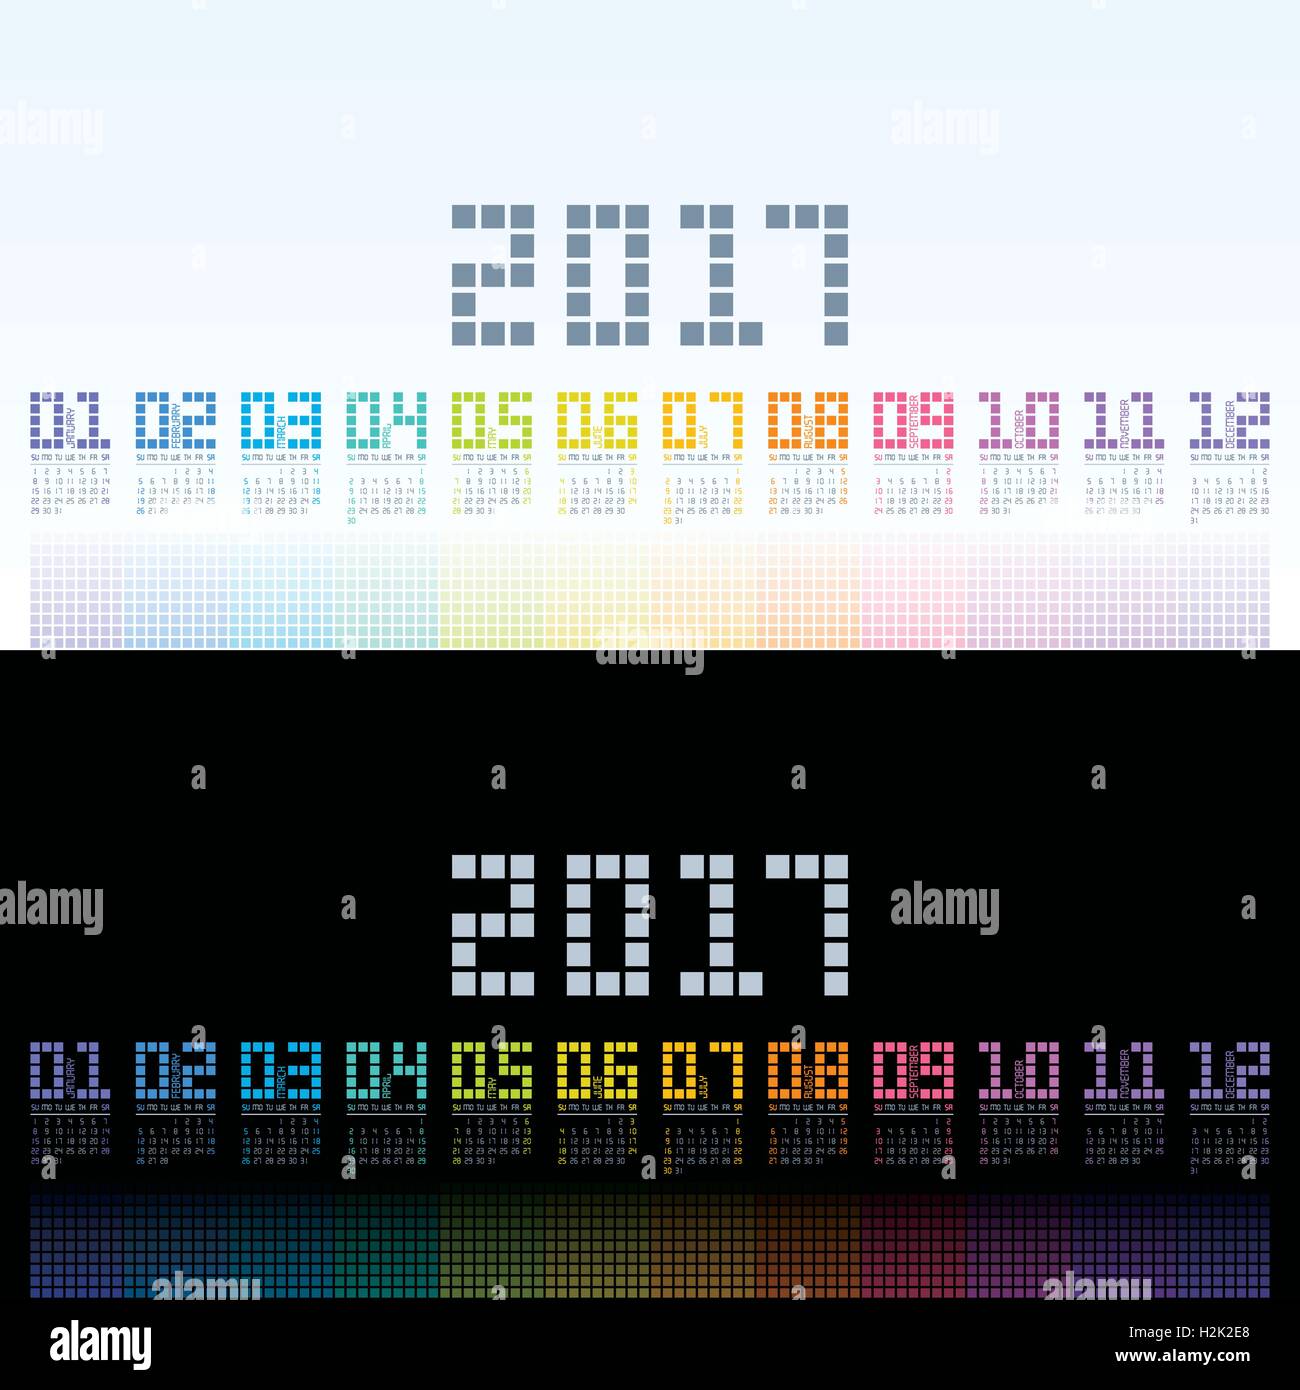 Calendar 17 Cool Template With Digital Colorful Shining For Your Designs Vector Eps10 Stock Vector Image Art Alamy